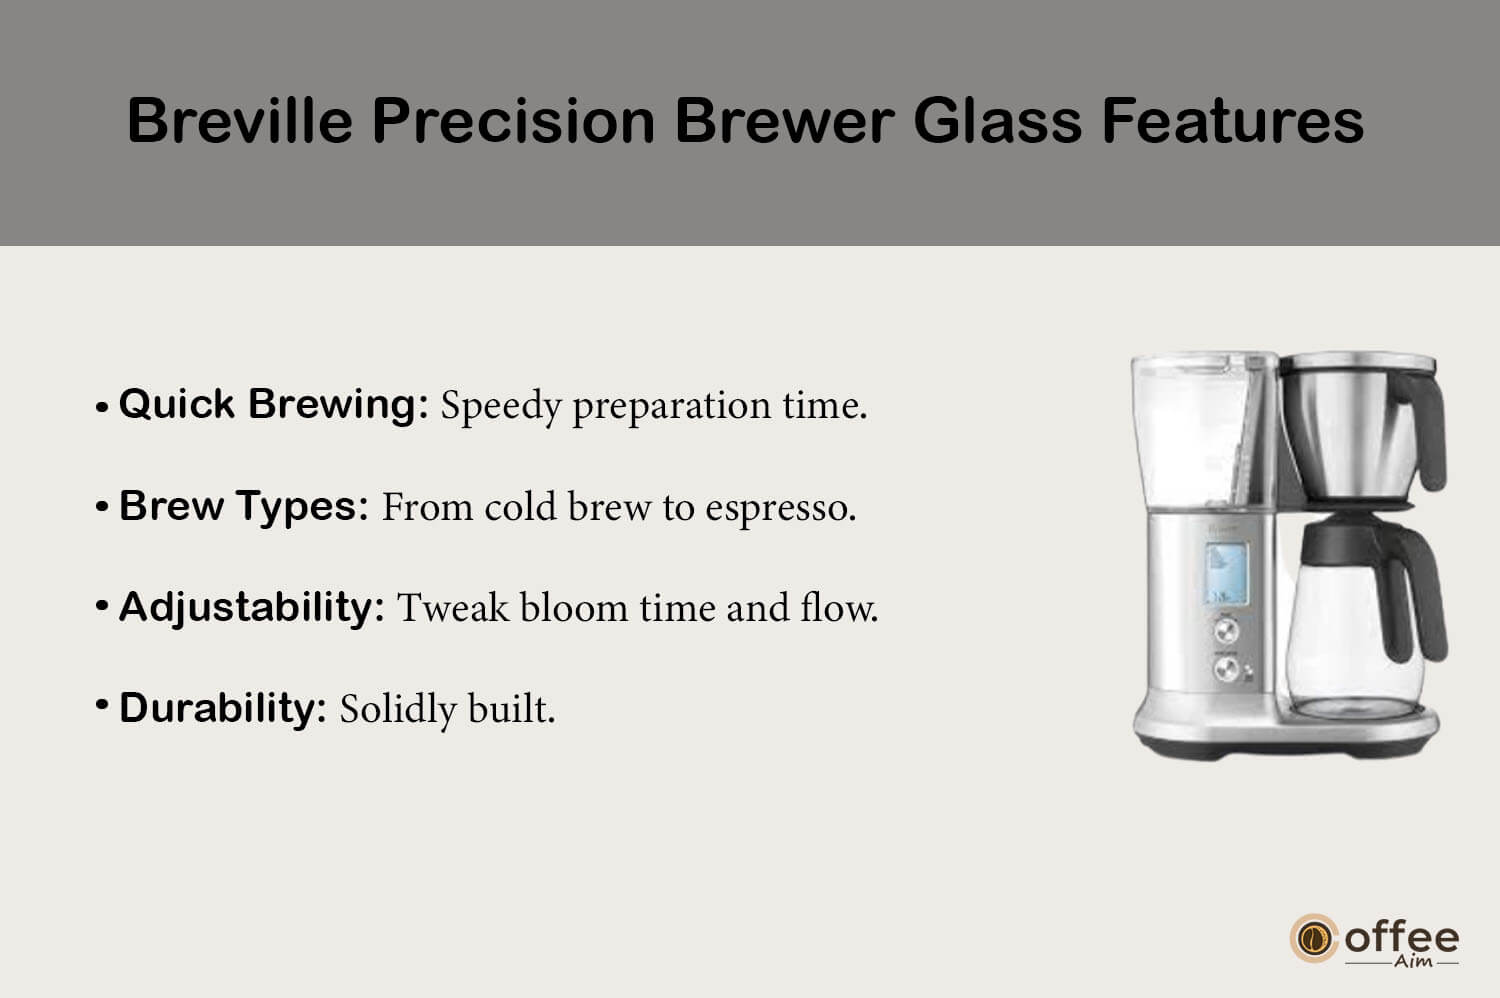 This image highlights the key features of the 'Breville Precision Brewer Glass' for our comprehensive 'Breville Precision Brewer Glass Review' article.